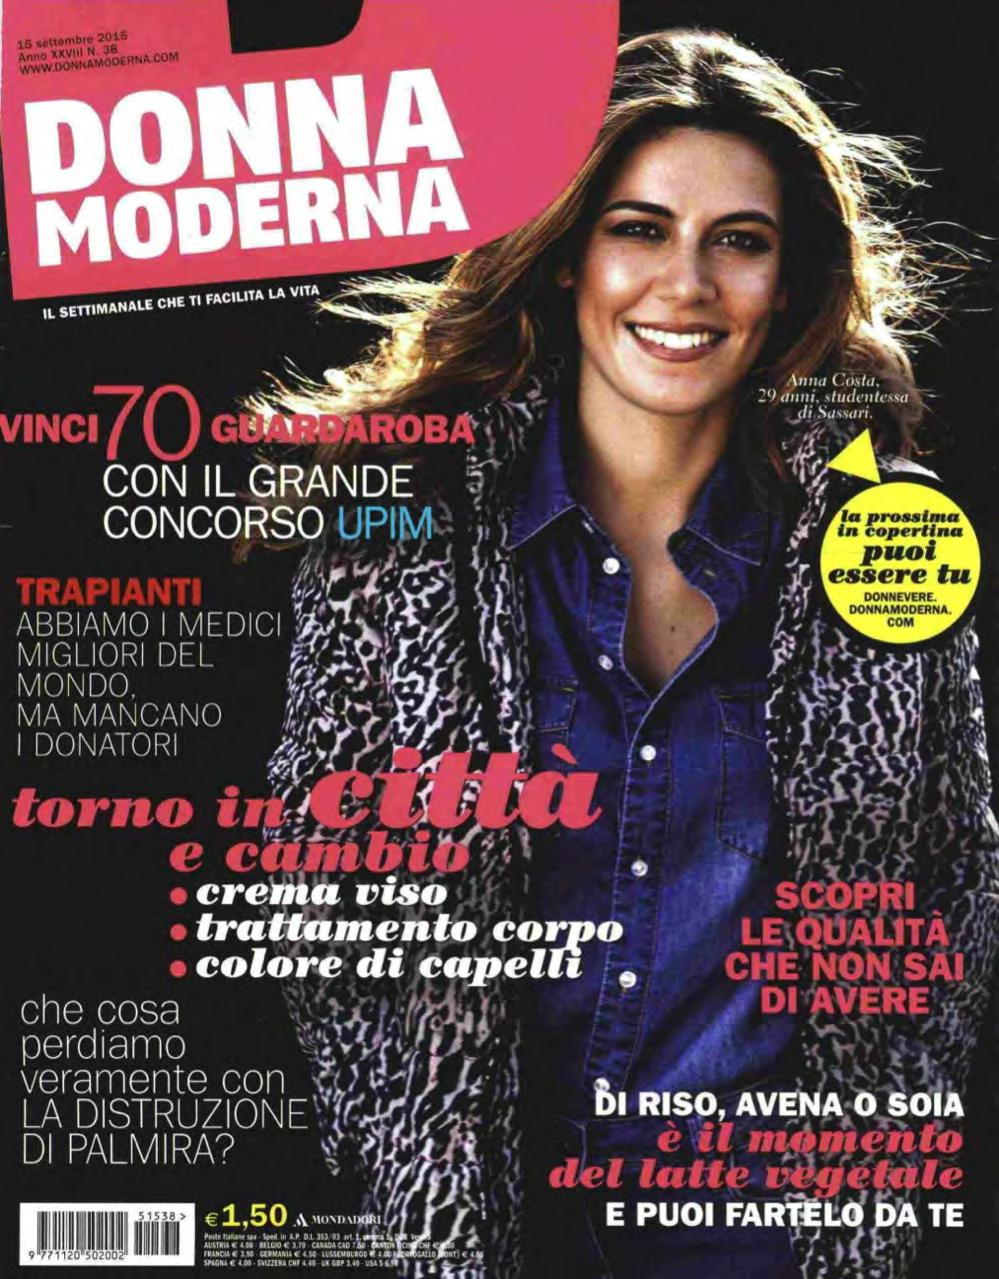 In-Store events Partnership with Donna Moderna (one of the most popular Italian women s magazine): Donna Moderna castings took place in Upim stores to select the protagonists of a editorials